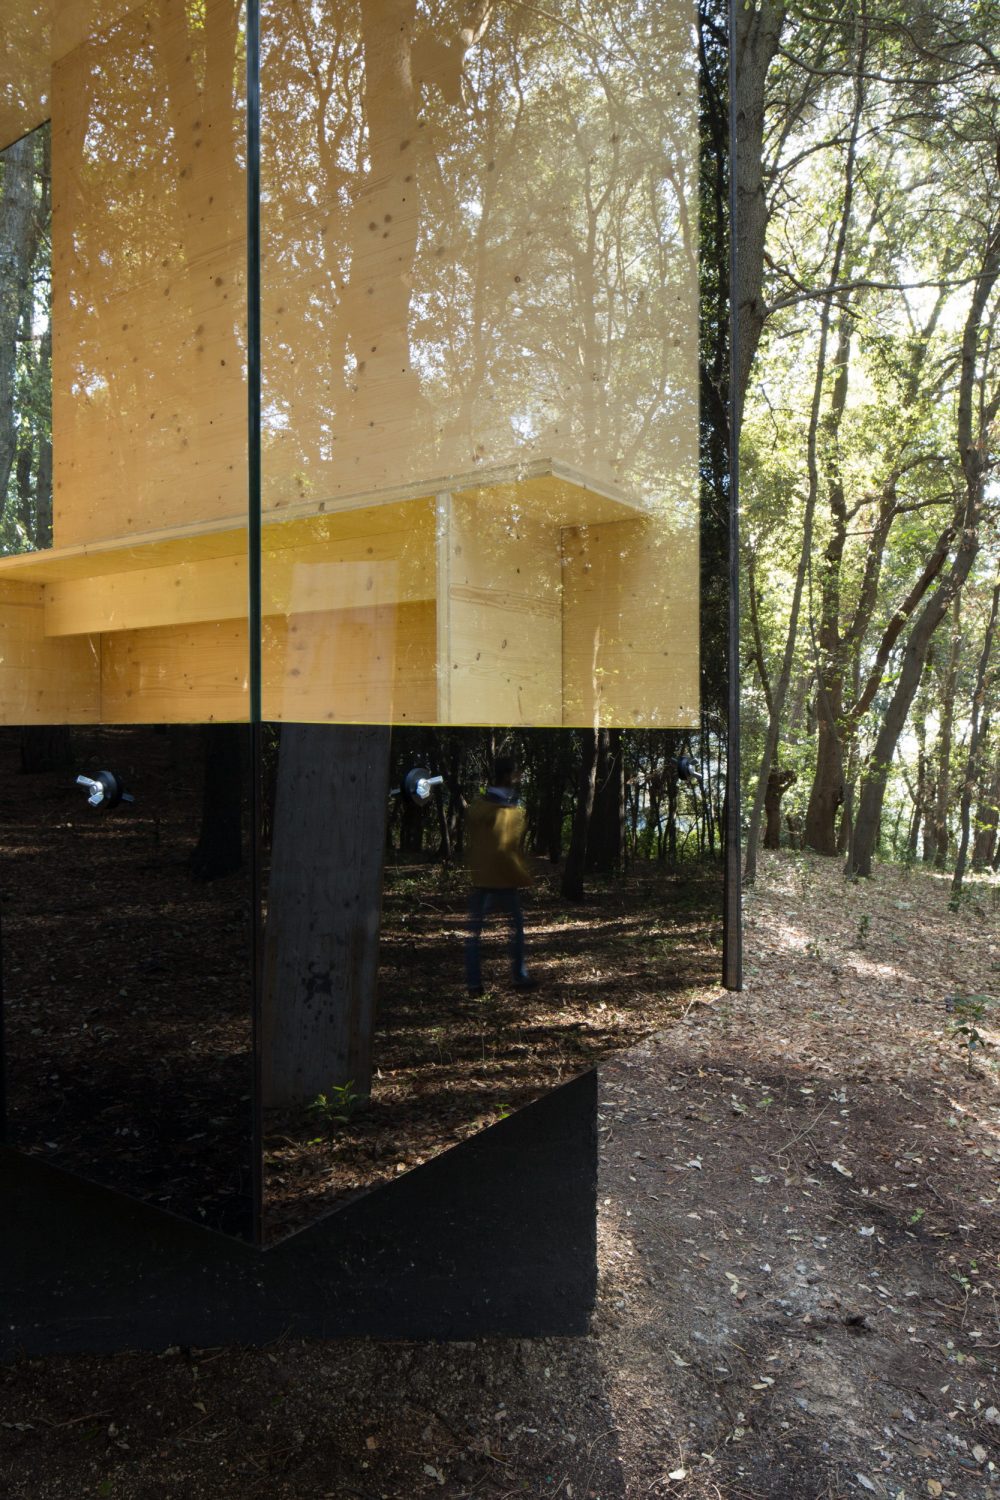 CBN – Cabin in the Wood by PLUS ULTRA studio